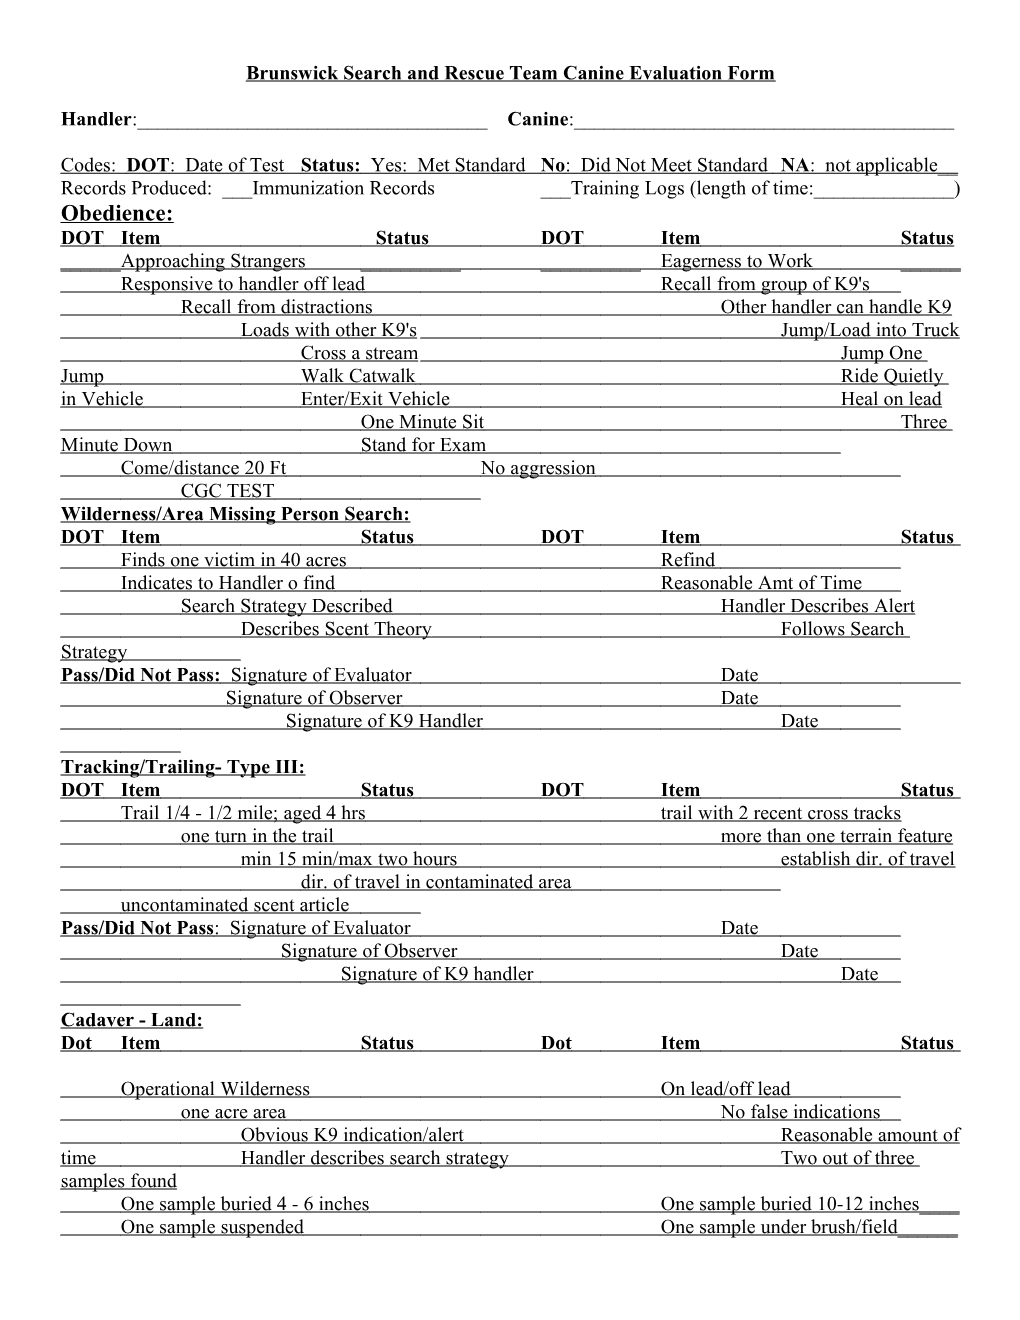 Brunswick Search and Rescue Team Canine Evaluation Form